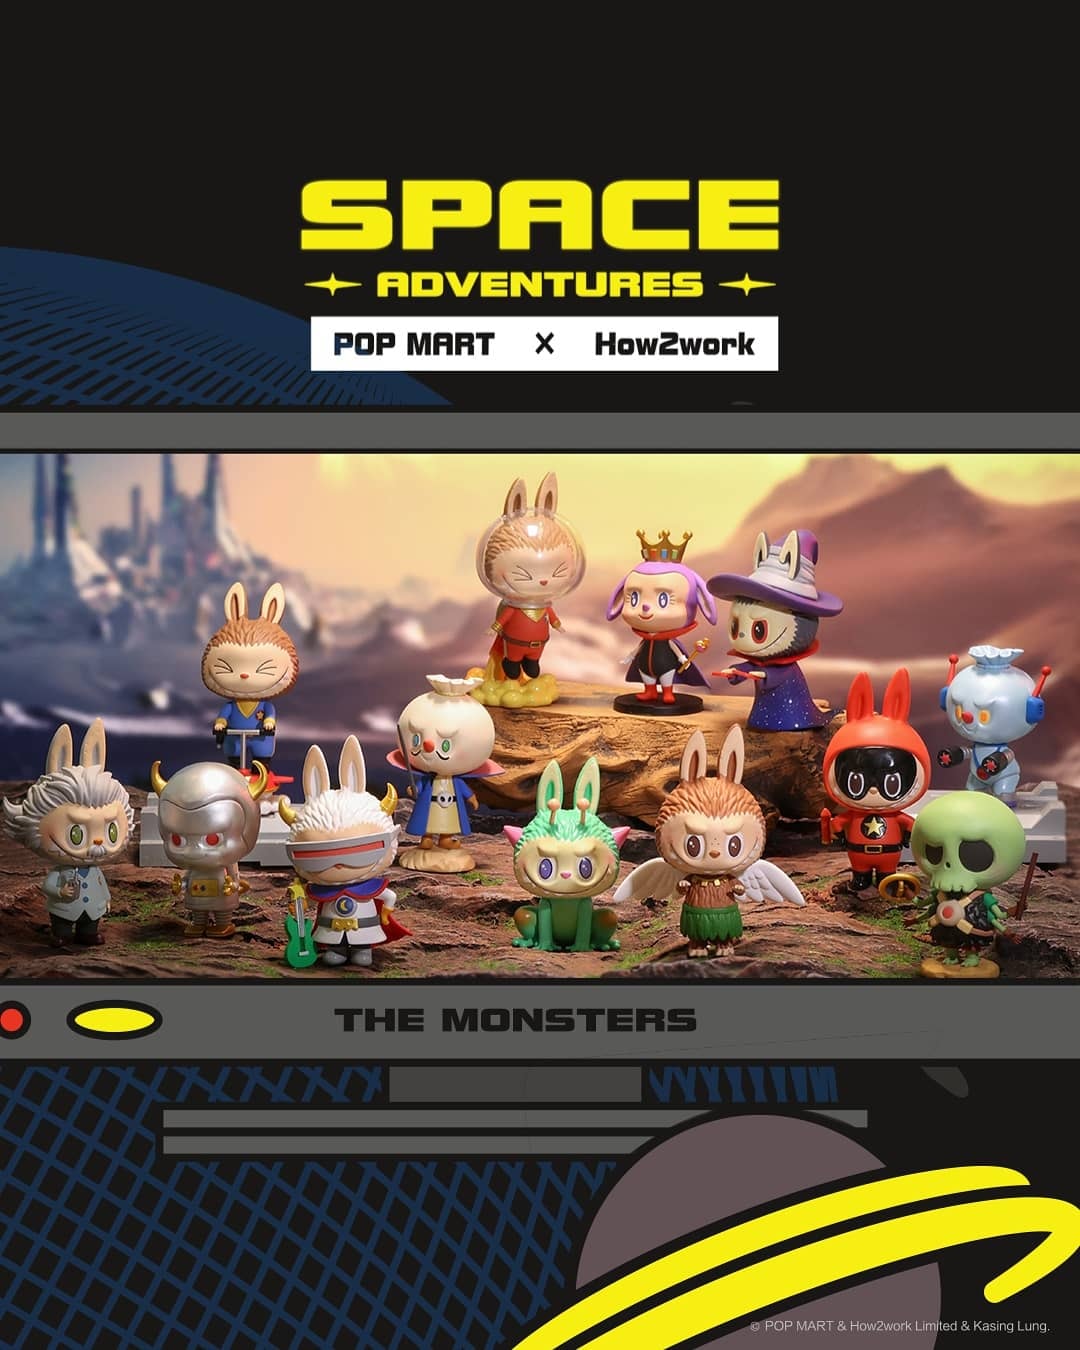 The Monsters: Space Adventures Blind Box Series by Kasing Lung